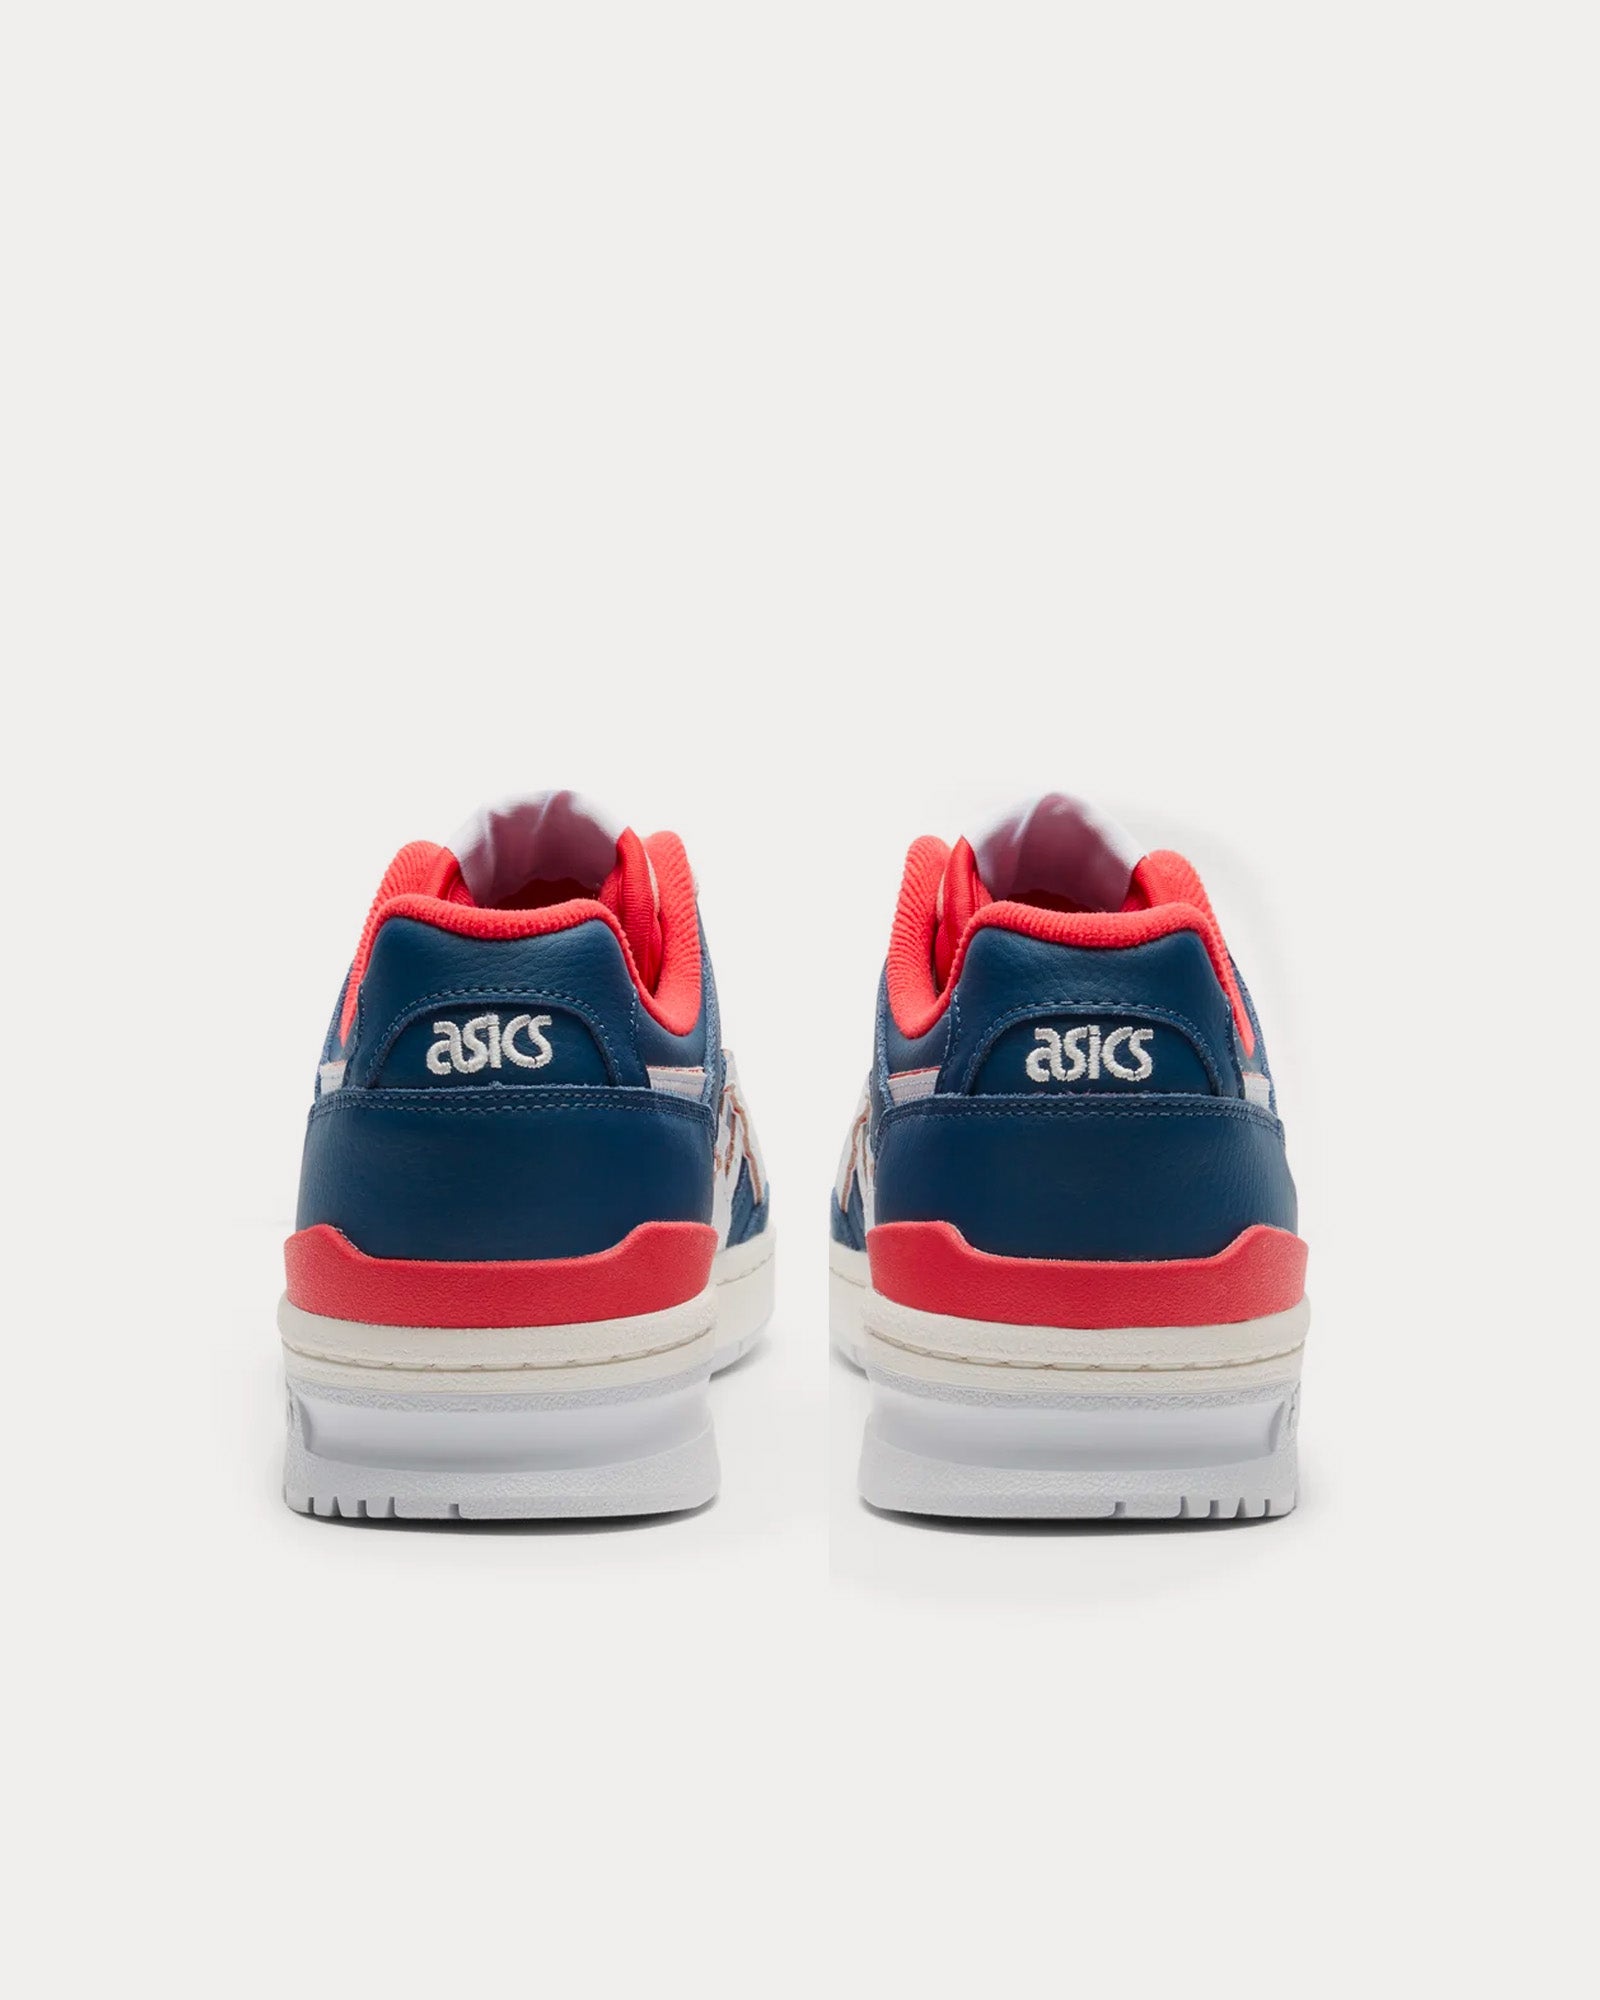 Asics x CDG Shirt - EX89 Navy / White / Red Low Top Sneakers